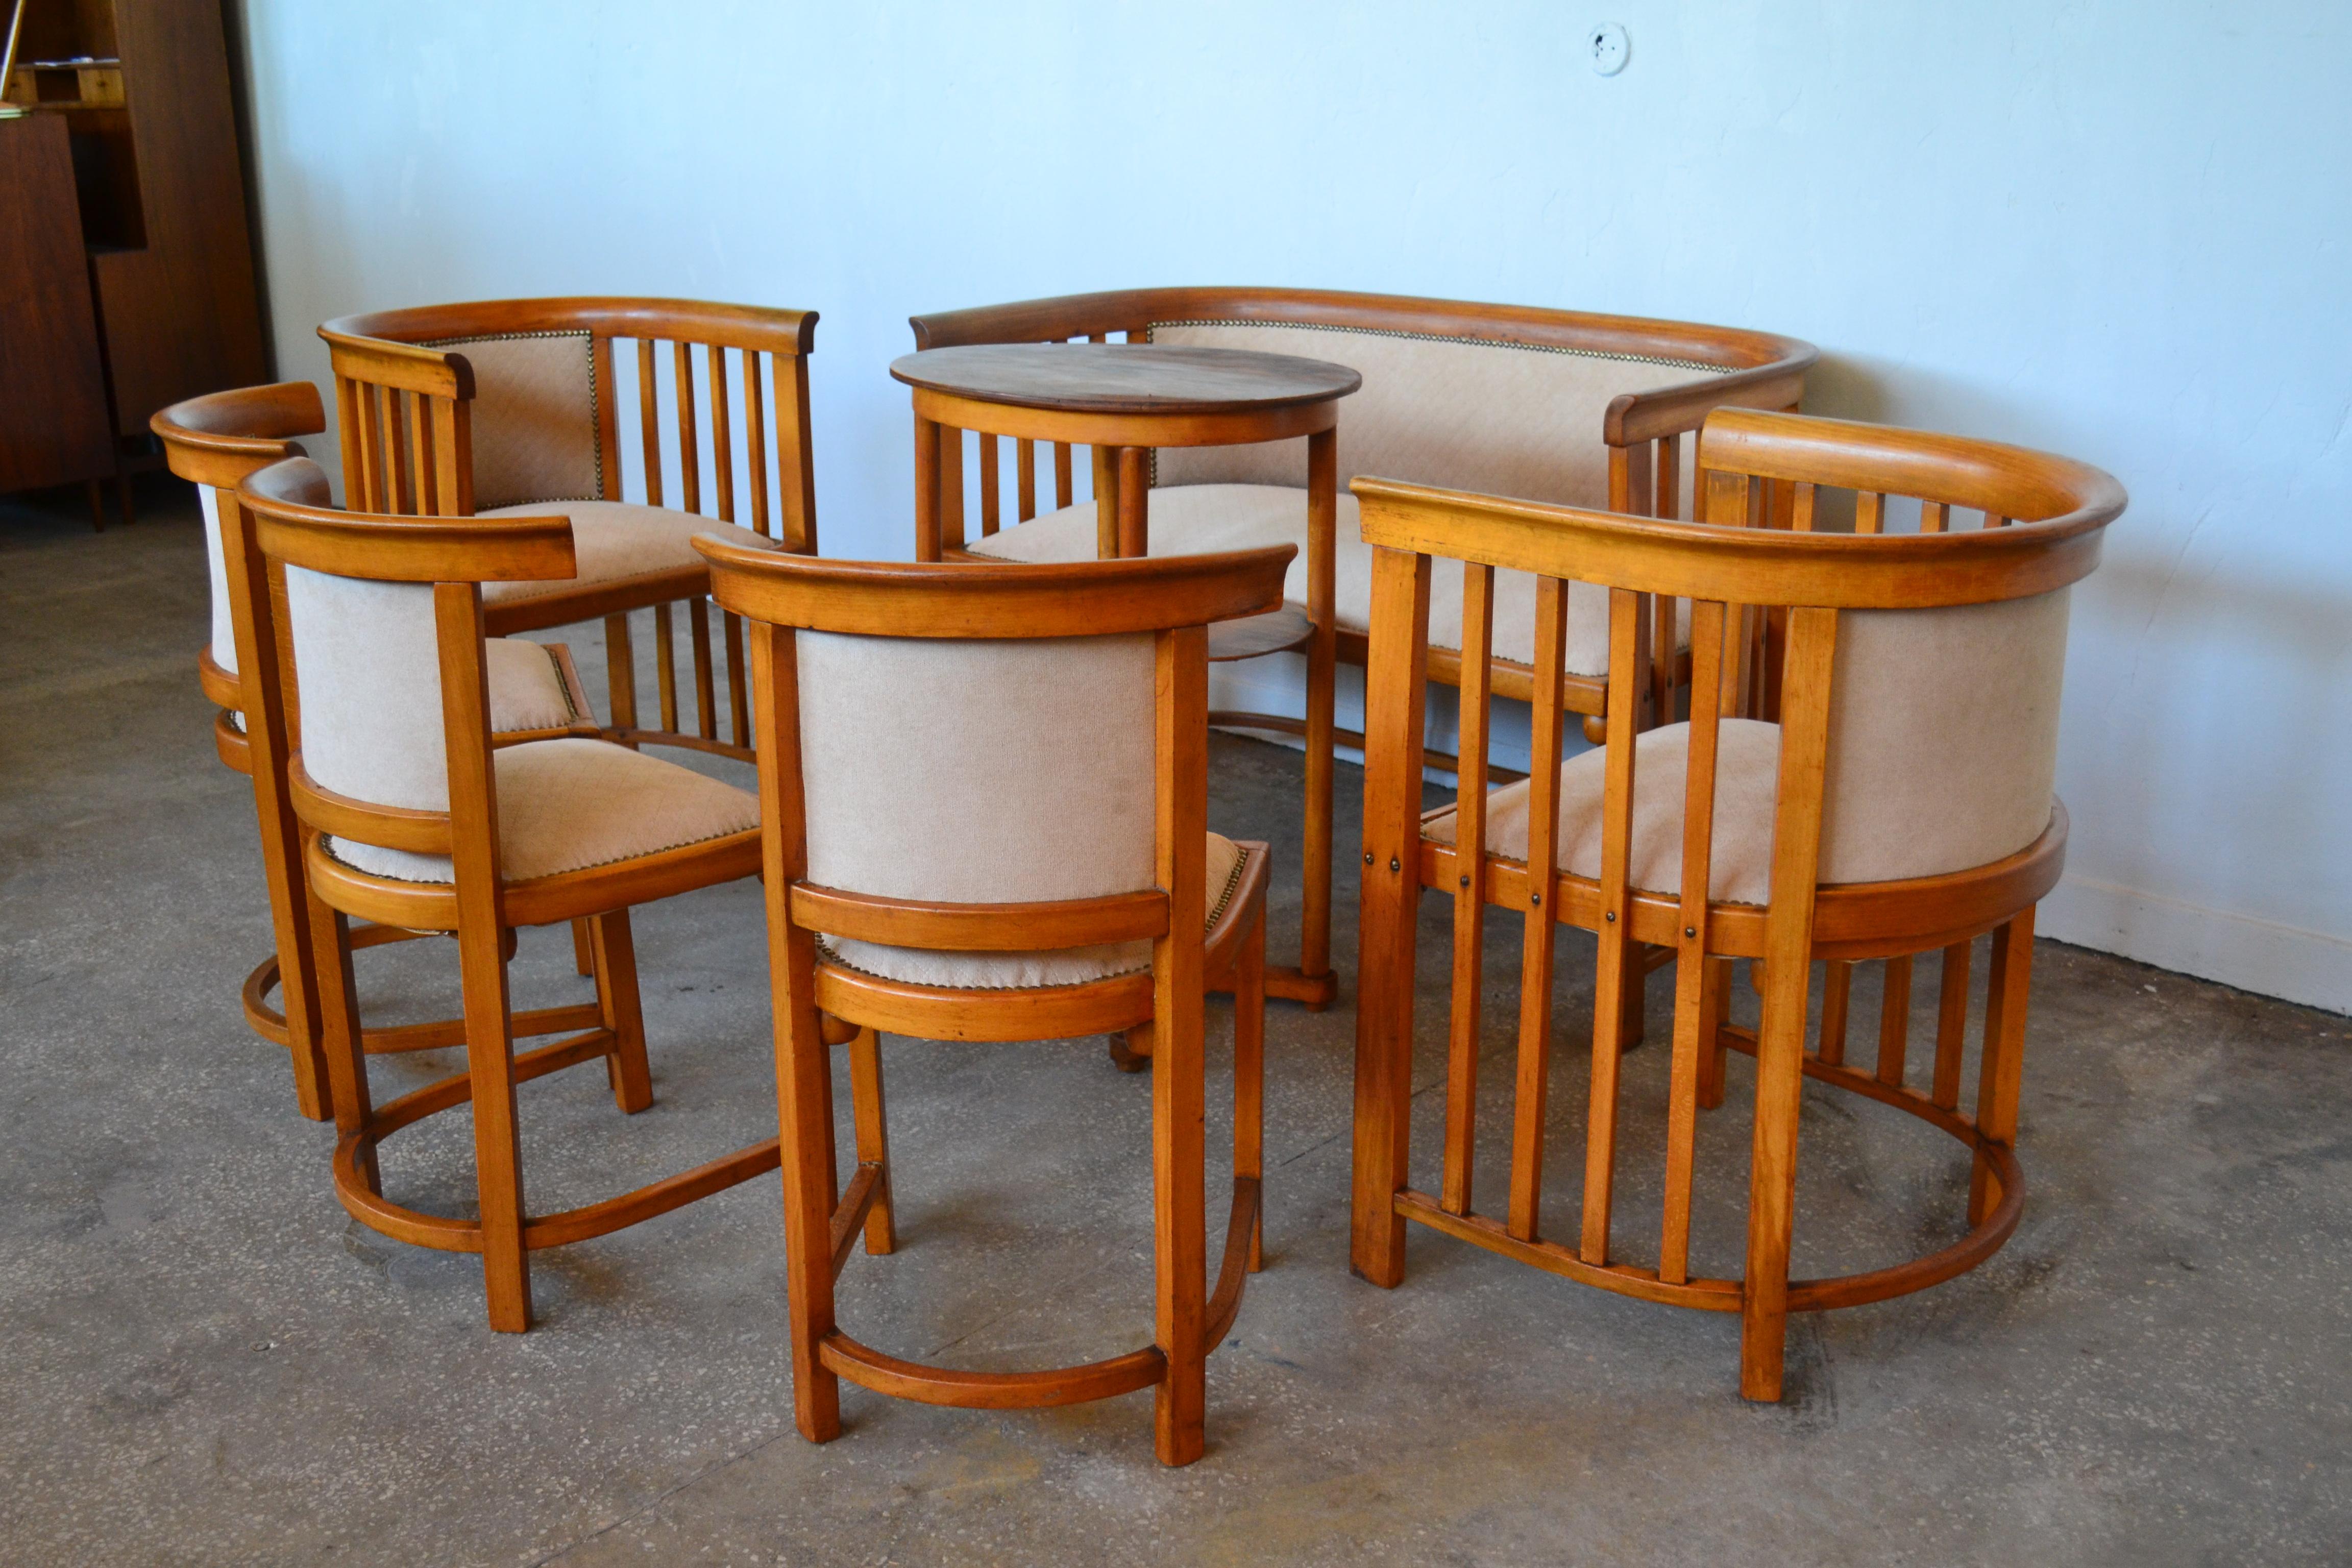 Vintage design,

This large dining set was designed by Josef Hoffmann for Jacob & Josef Kohn and is from 1905. It consists of a sofa, two armchairs, three chairs, and a coffee table. It has been reupholstered and the original springs were tied.